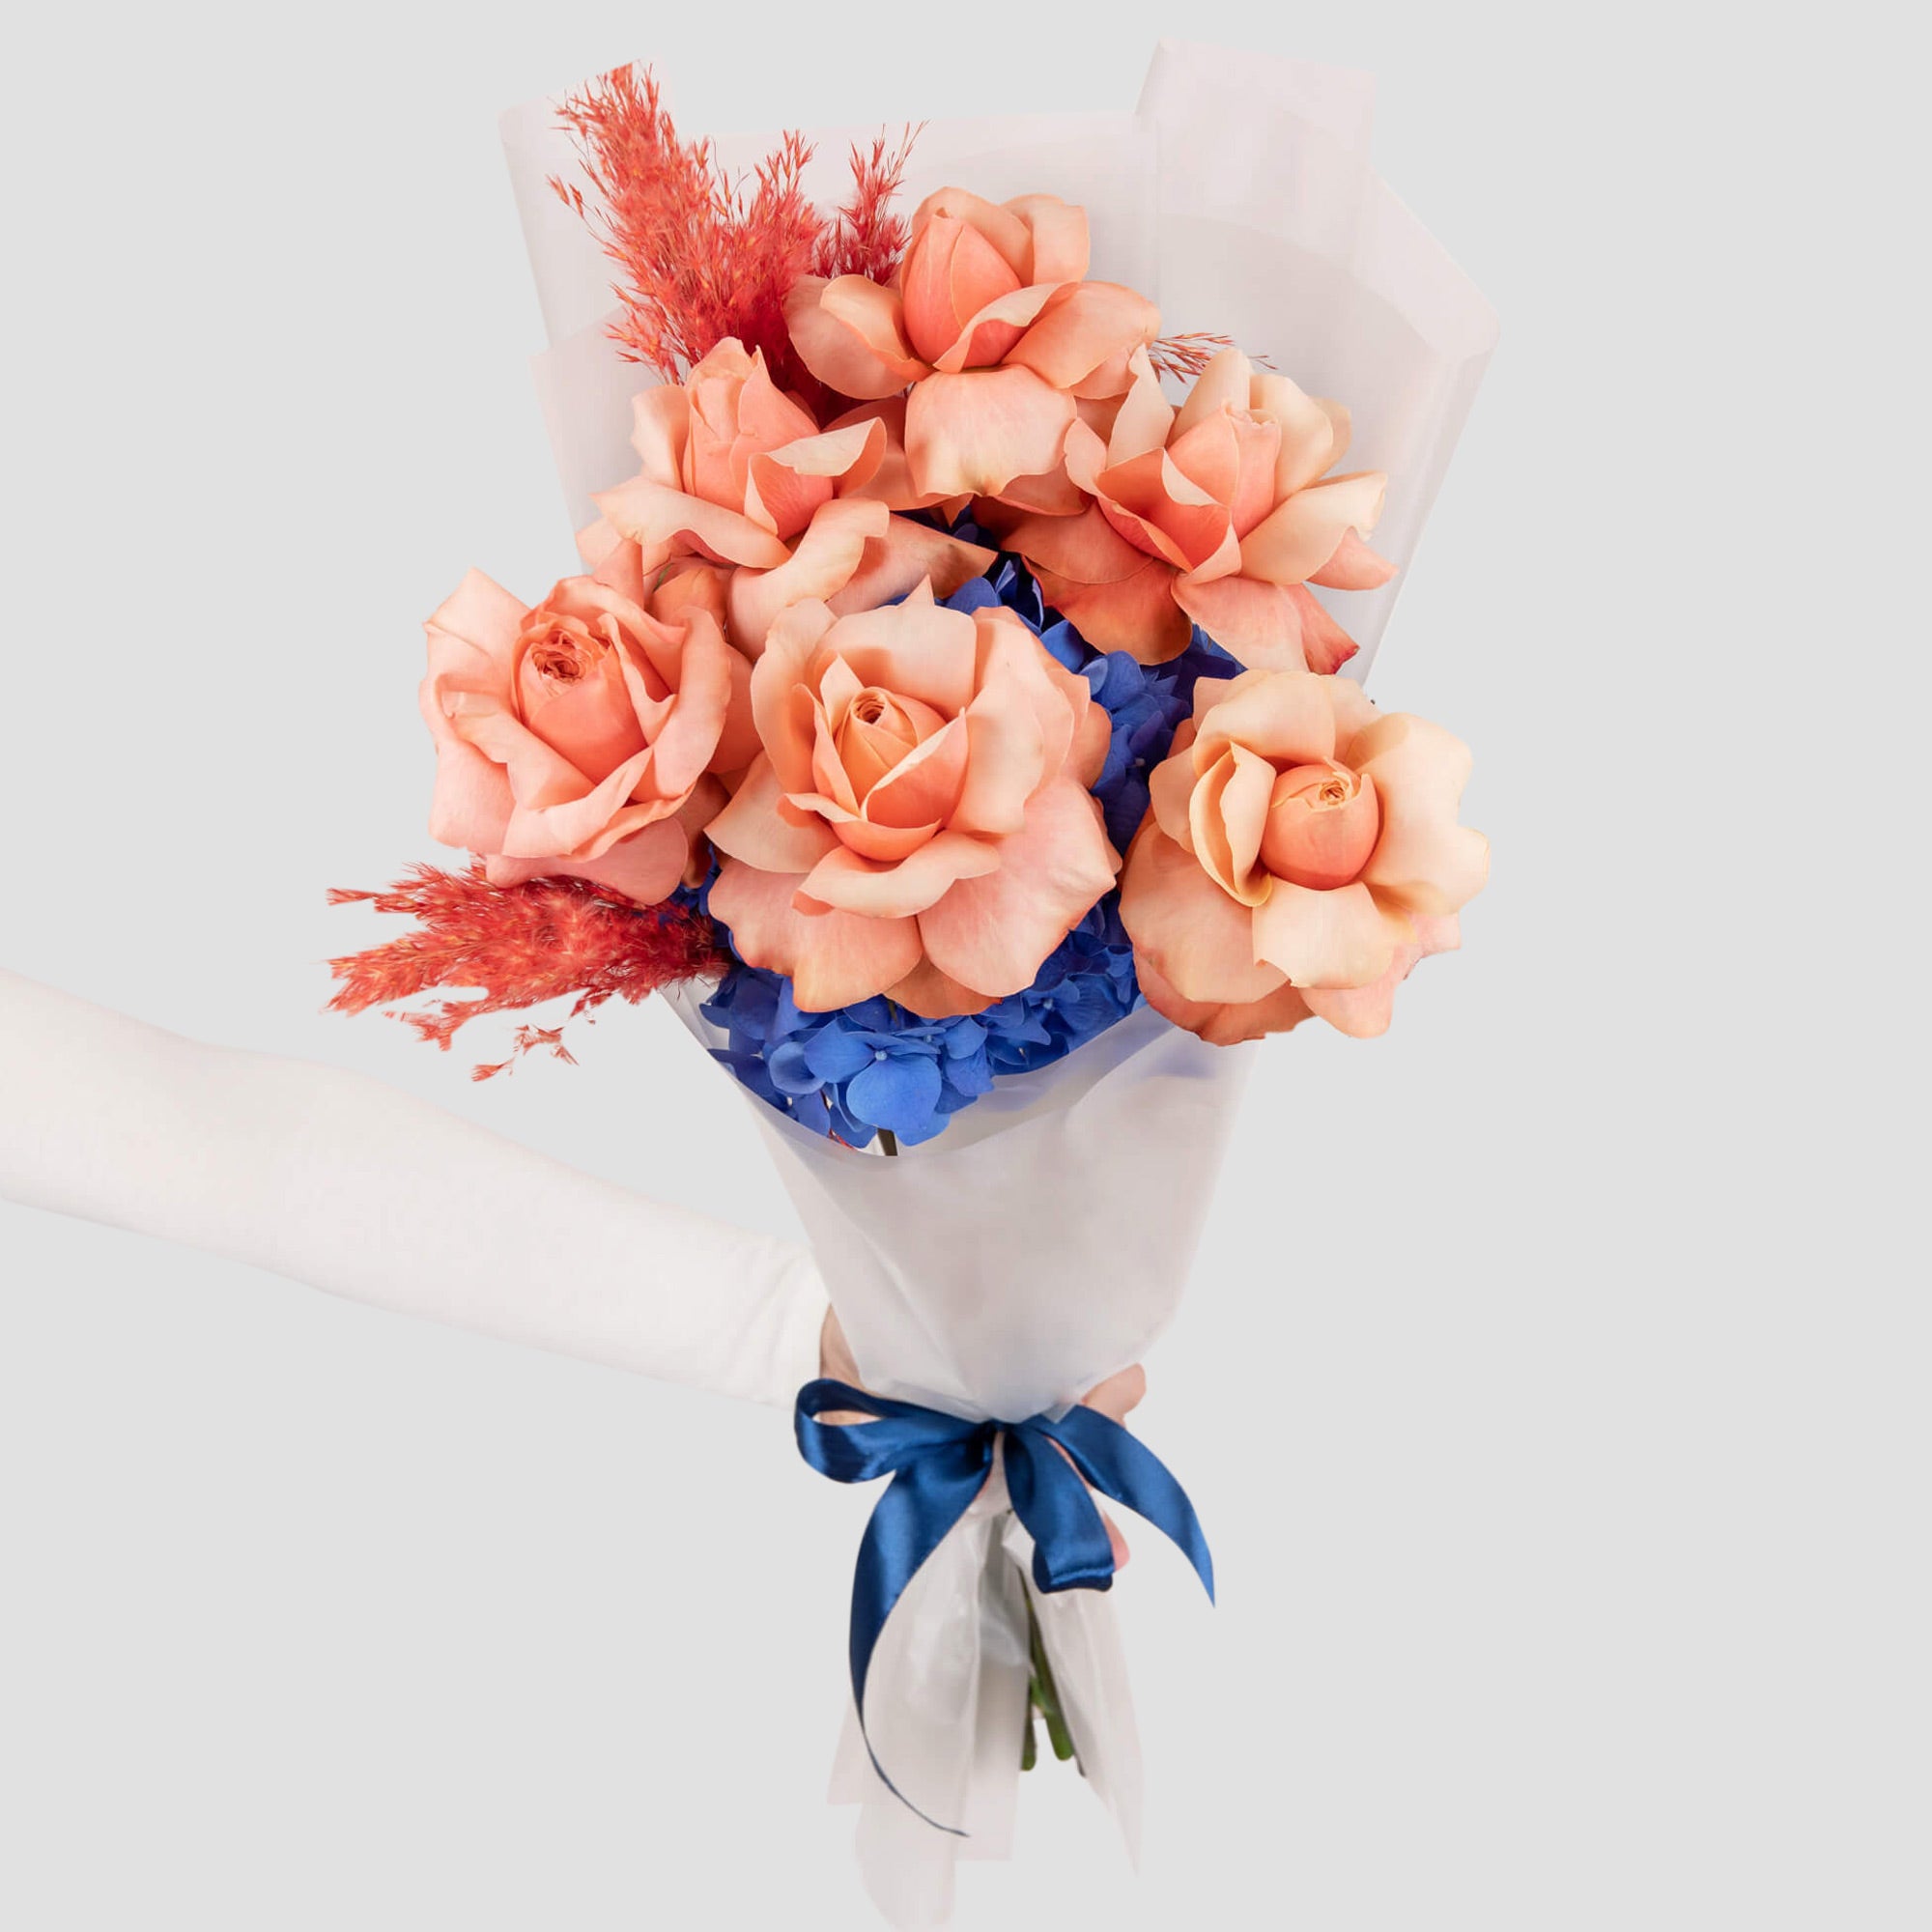 Bouquet with orange roses and hydrangea